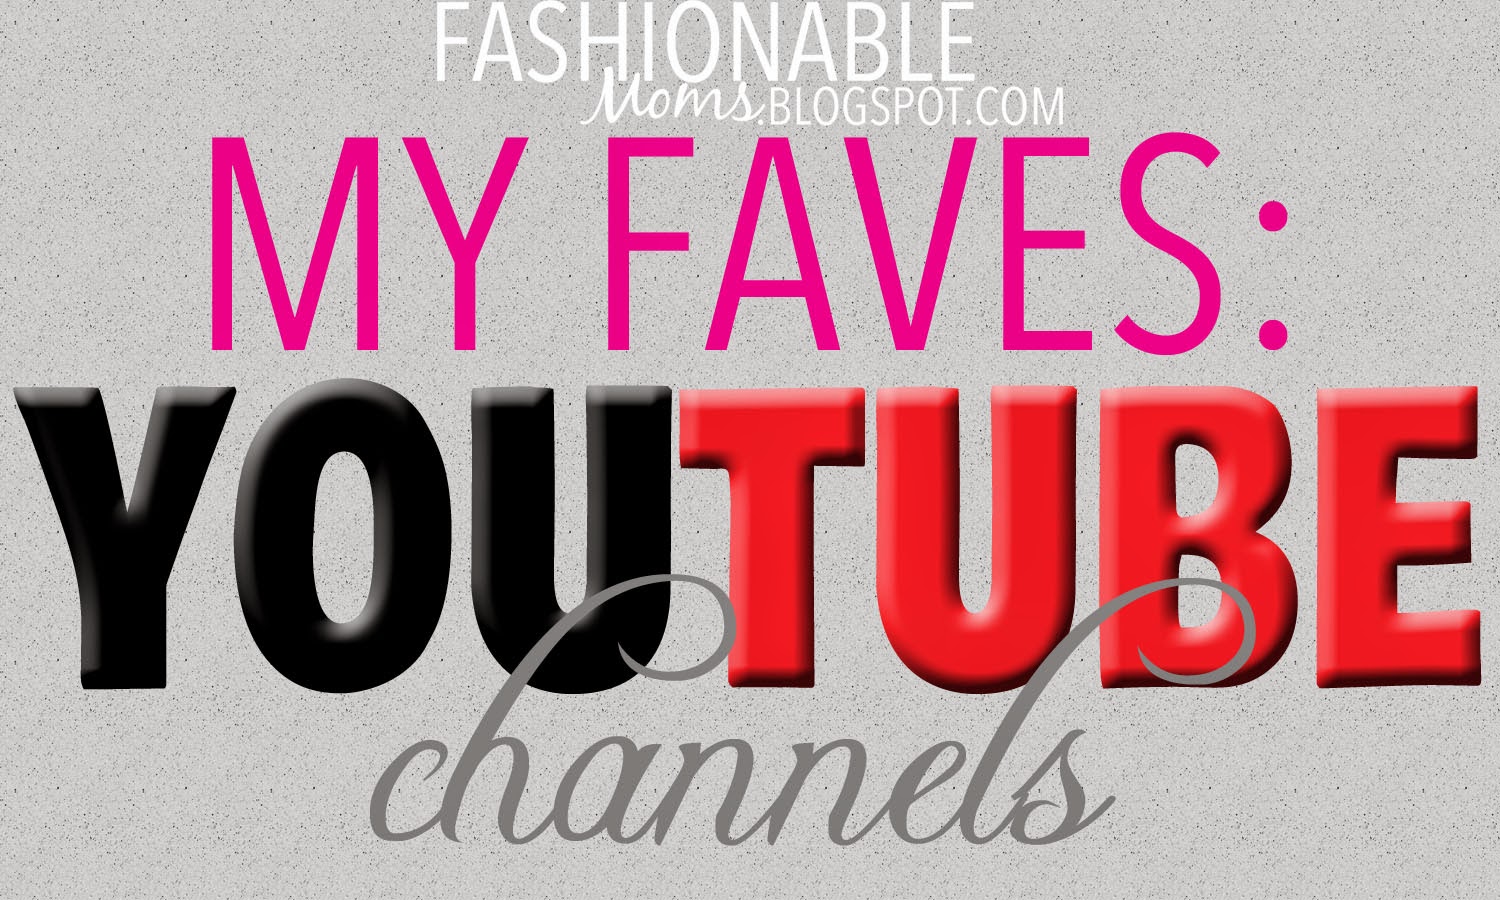 My Fashionable Designs: My Faves - YouTube Channels